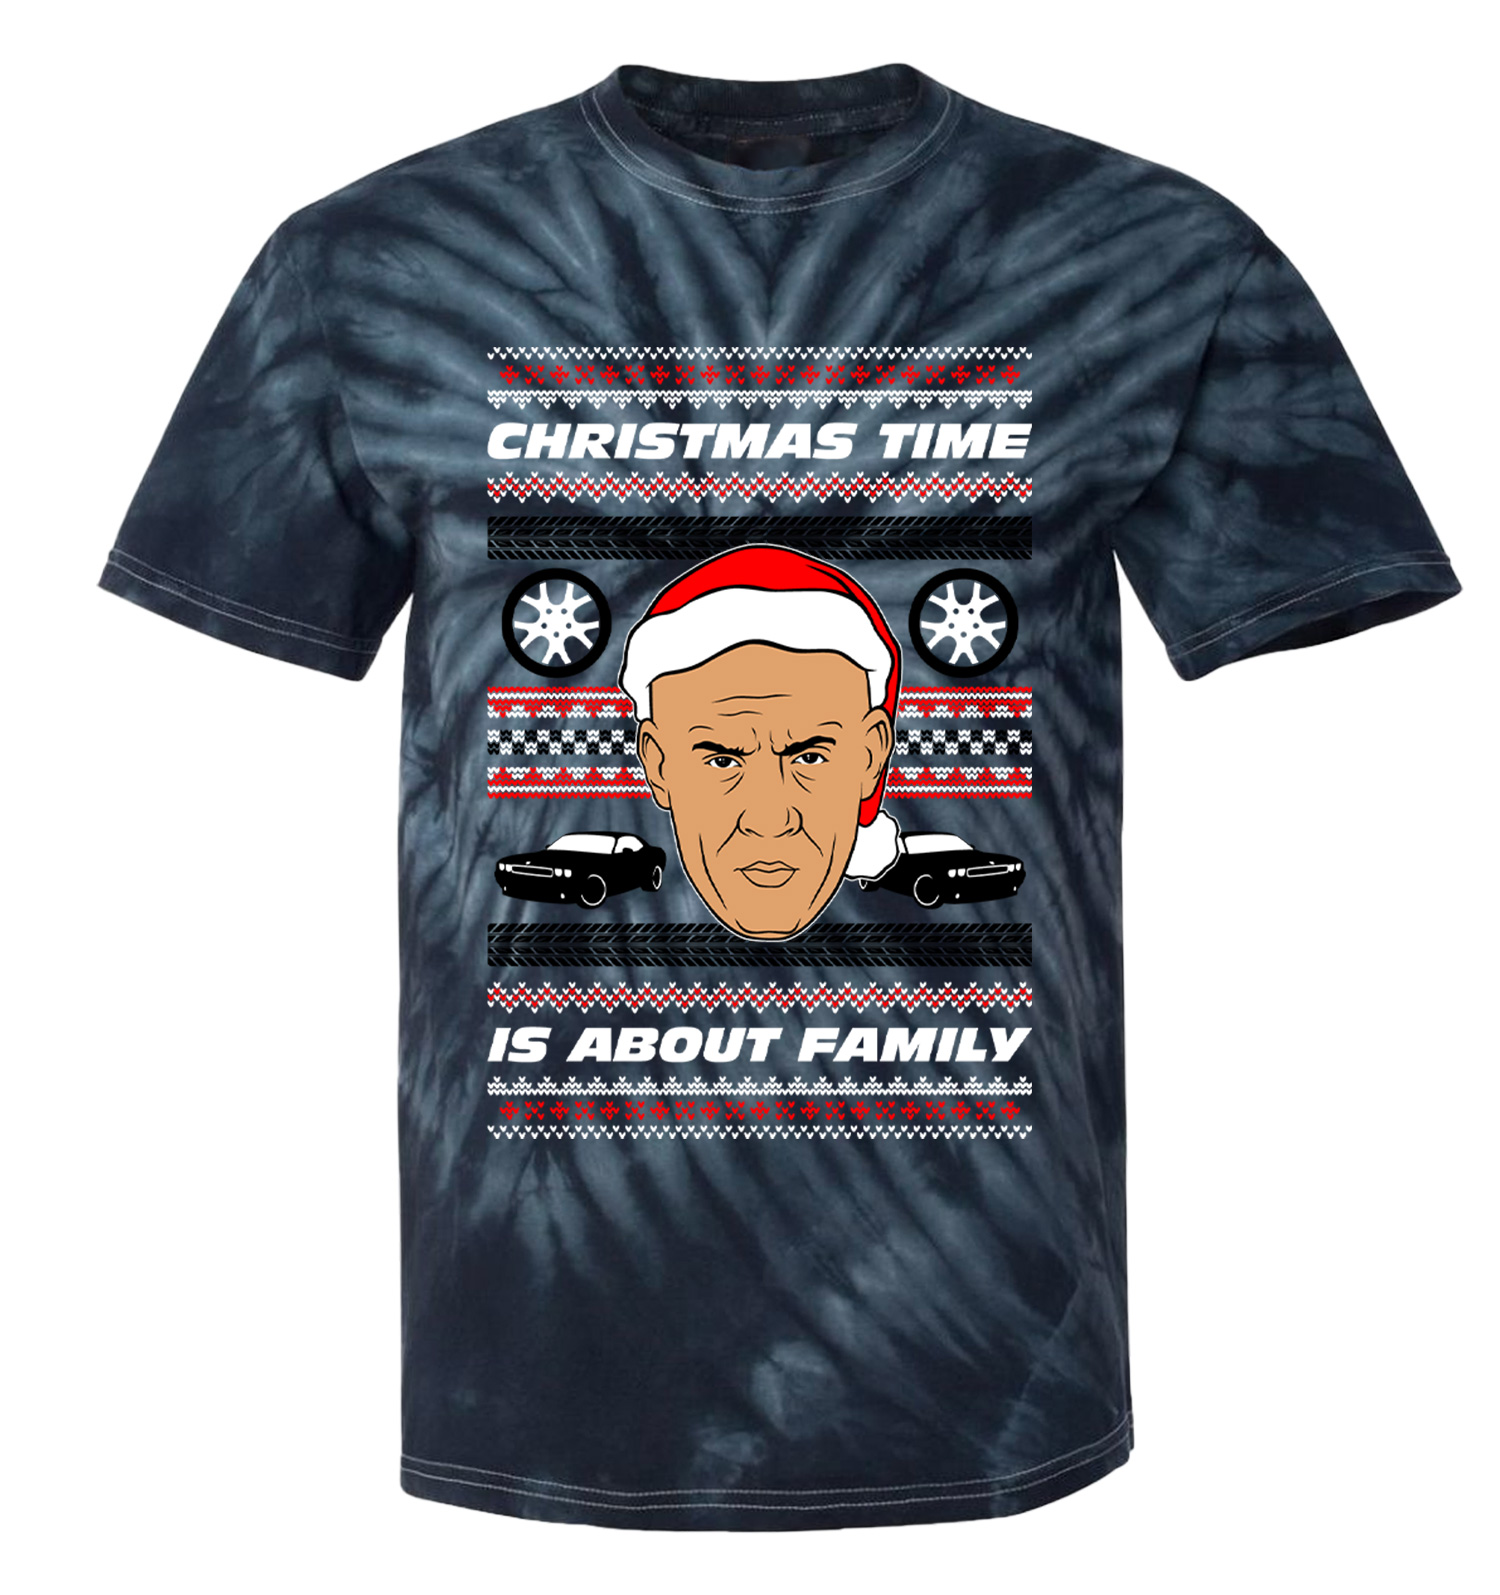 Christmas Time Is About Family - Furious Dom Toretto Men's T-shirt | eBay